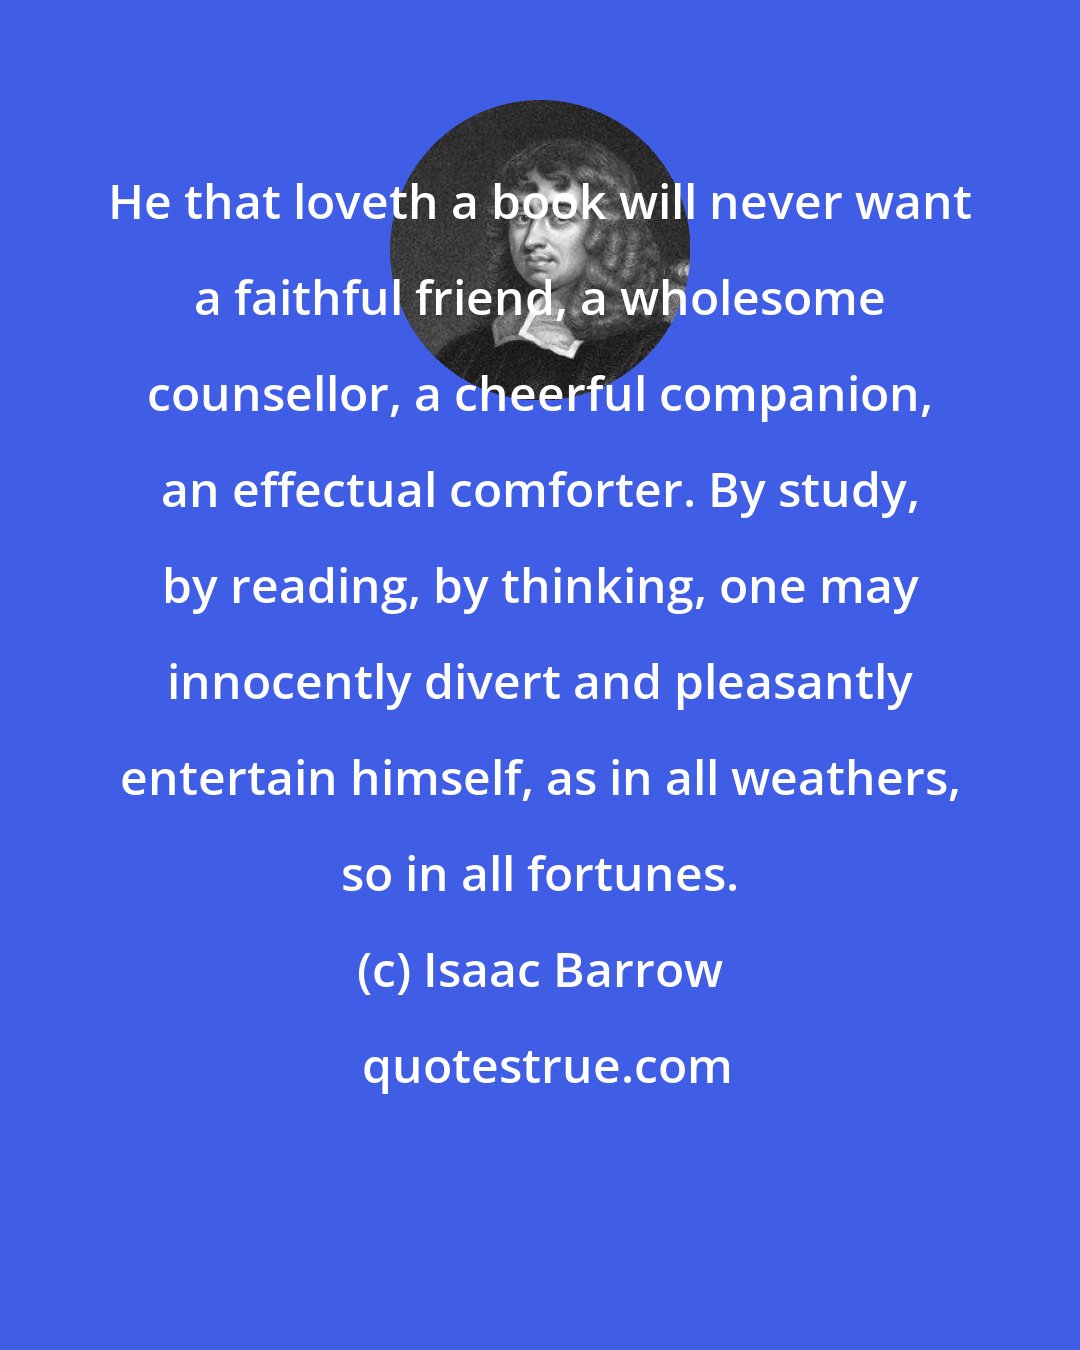 Isaac Barrow: He that loveth a book will never want a faithful friend, a wholesome counsellor, a cheerful companion, an effectual comforter. By study, by reading, by thinking, one may innocently divert and pleasantly entertain himself, as in all weathers, so in all fortunes.